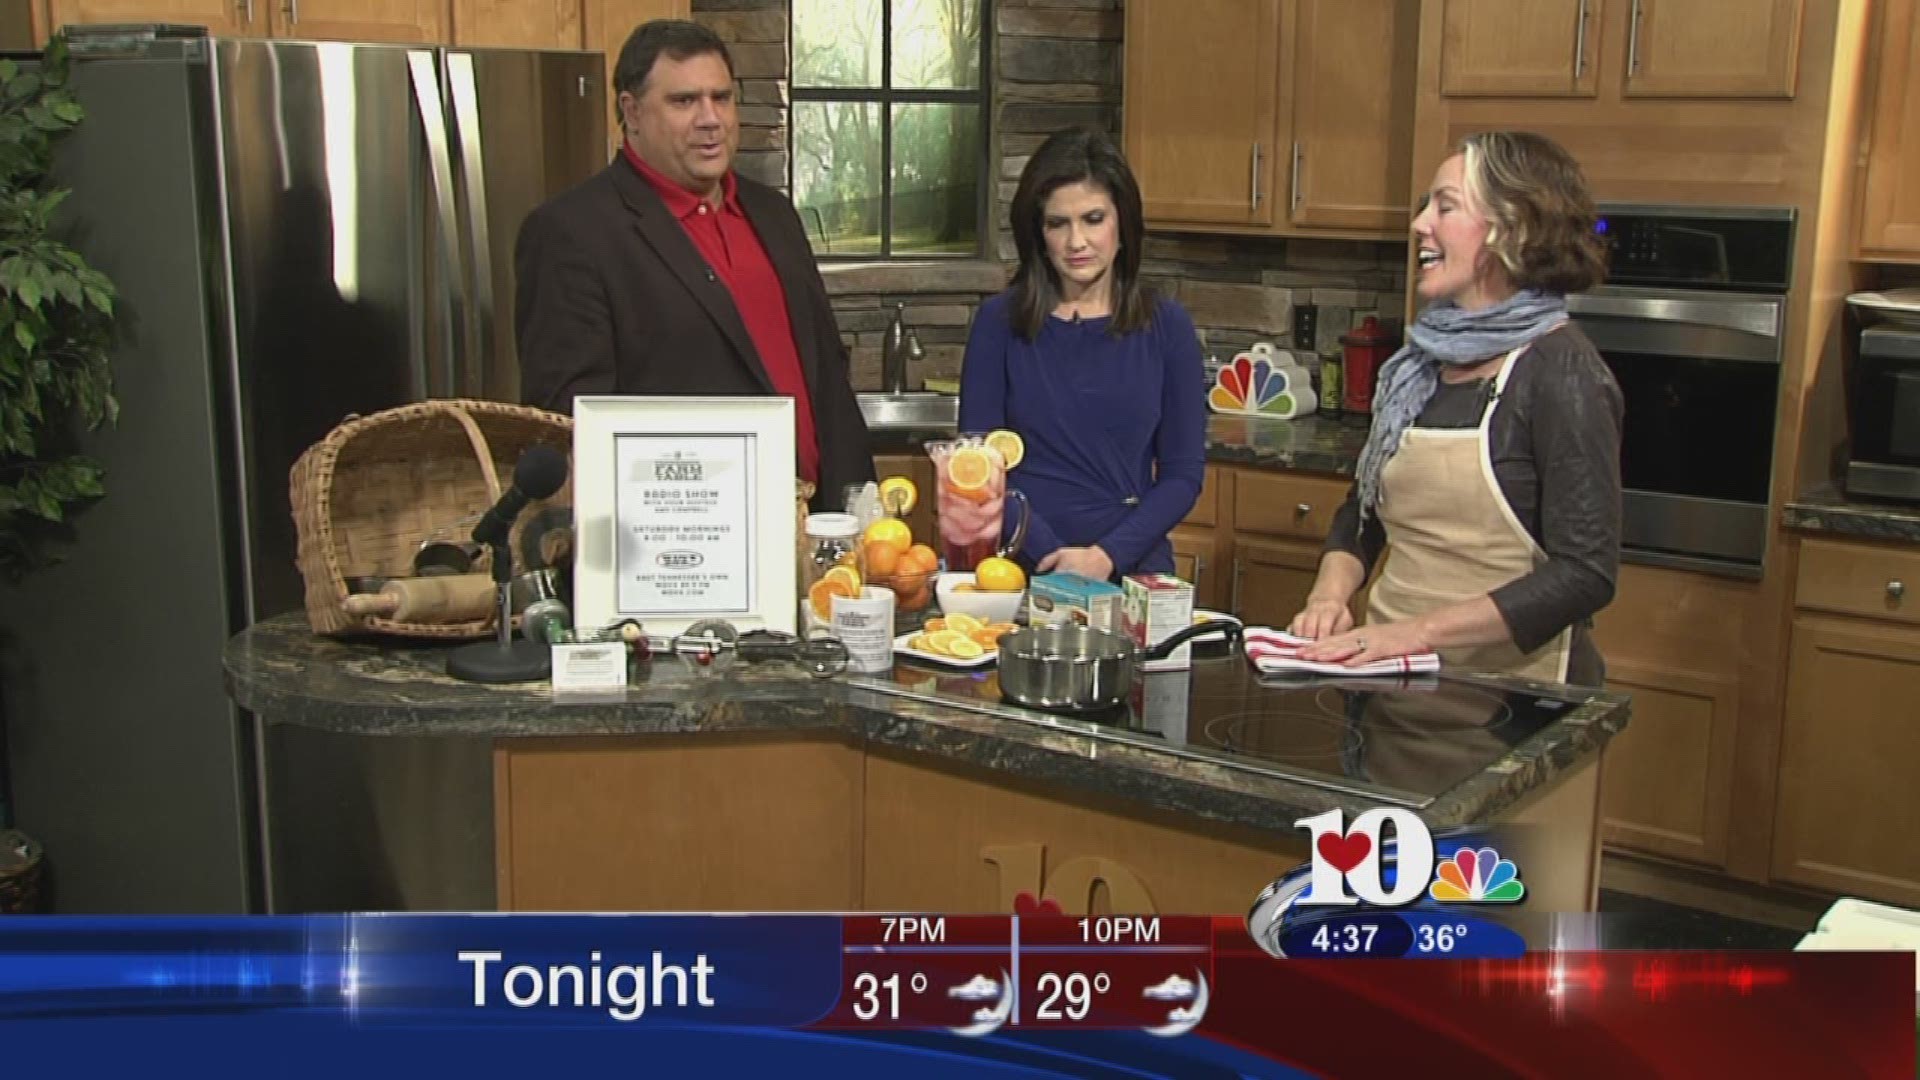 January 11, 2016Live at Five at 4Amy Campbell is the host of Tennessee Farm to Table which airs on WDVXwww.TennesseeFarmTable.com